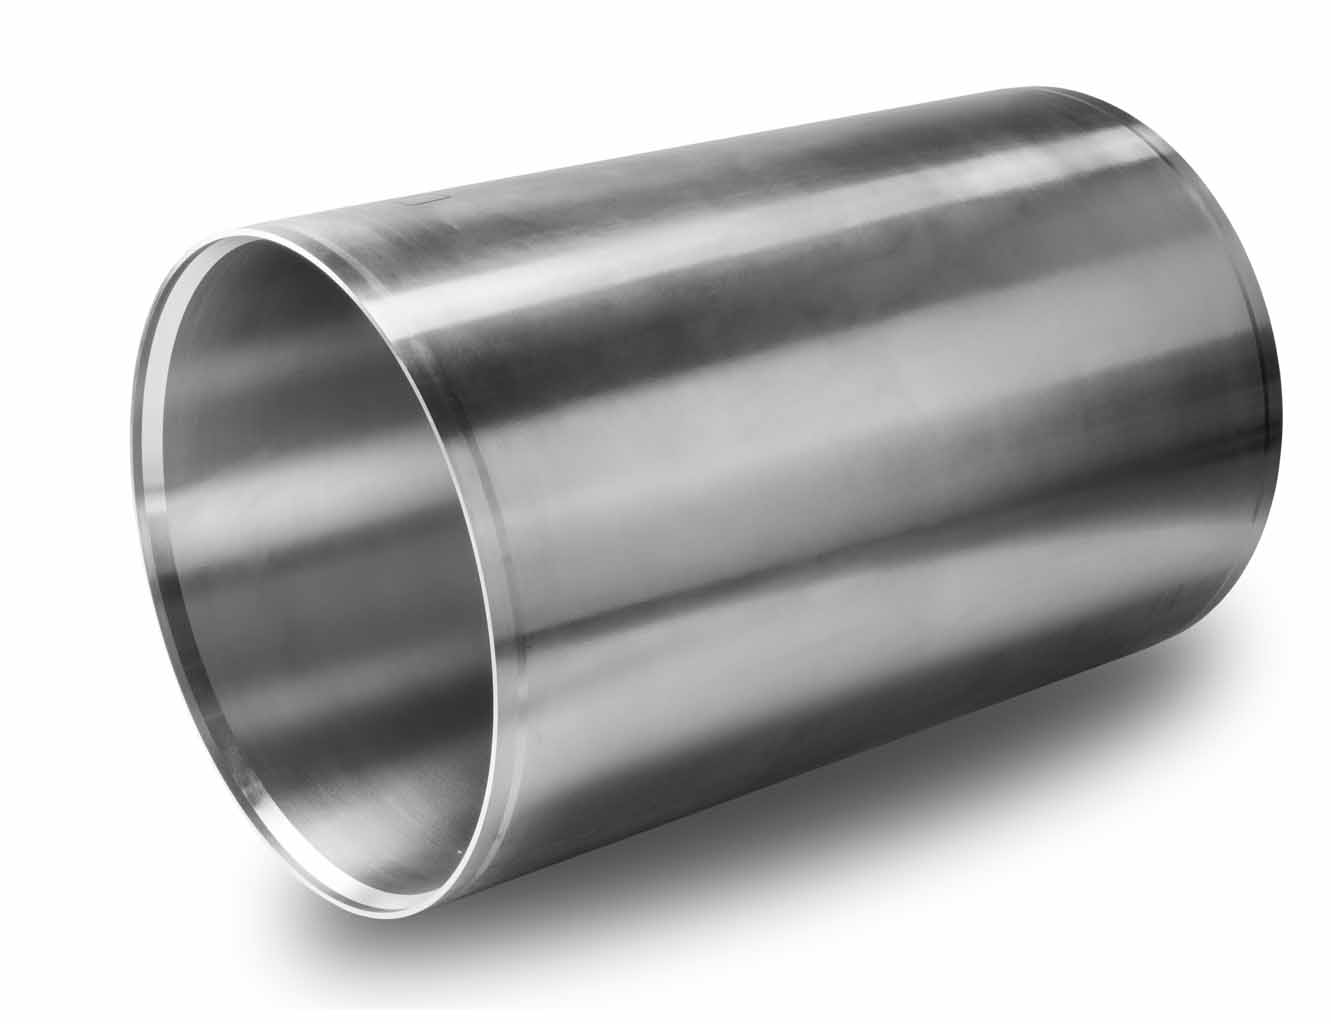 Sleeve bushings for ship building industry